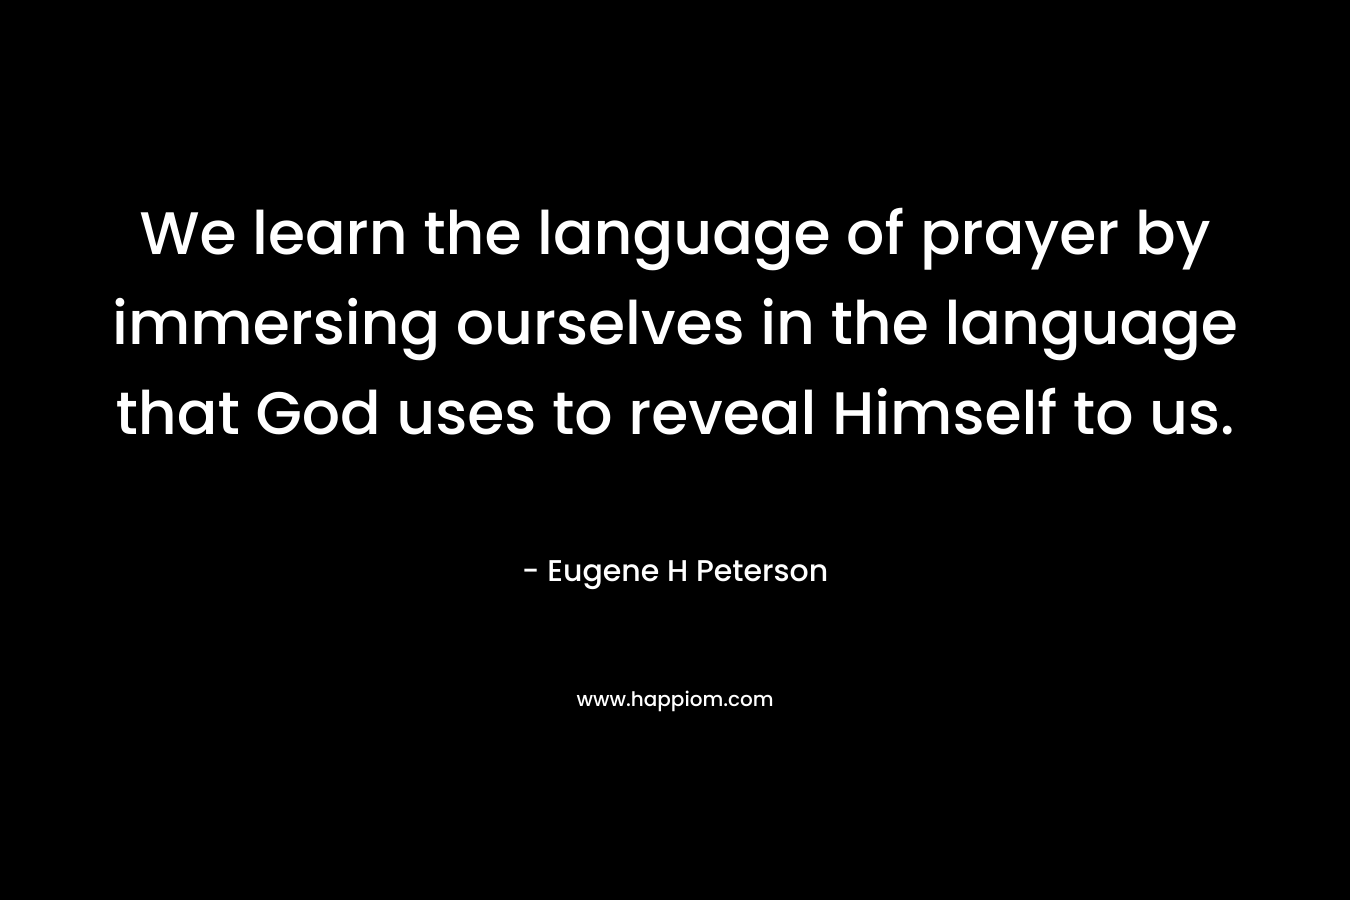 We learn the language of prayer by immersing ourselves in the language that God uses to reveal Himself to us.